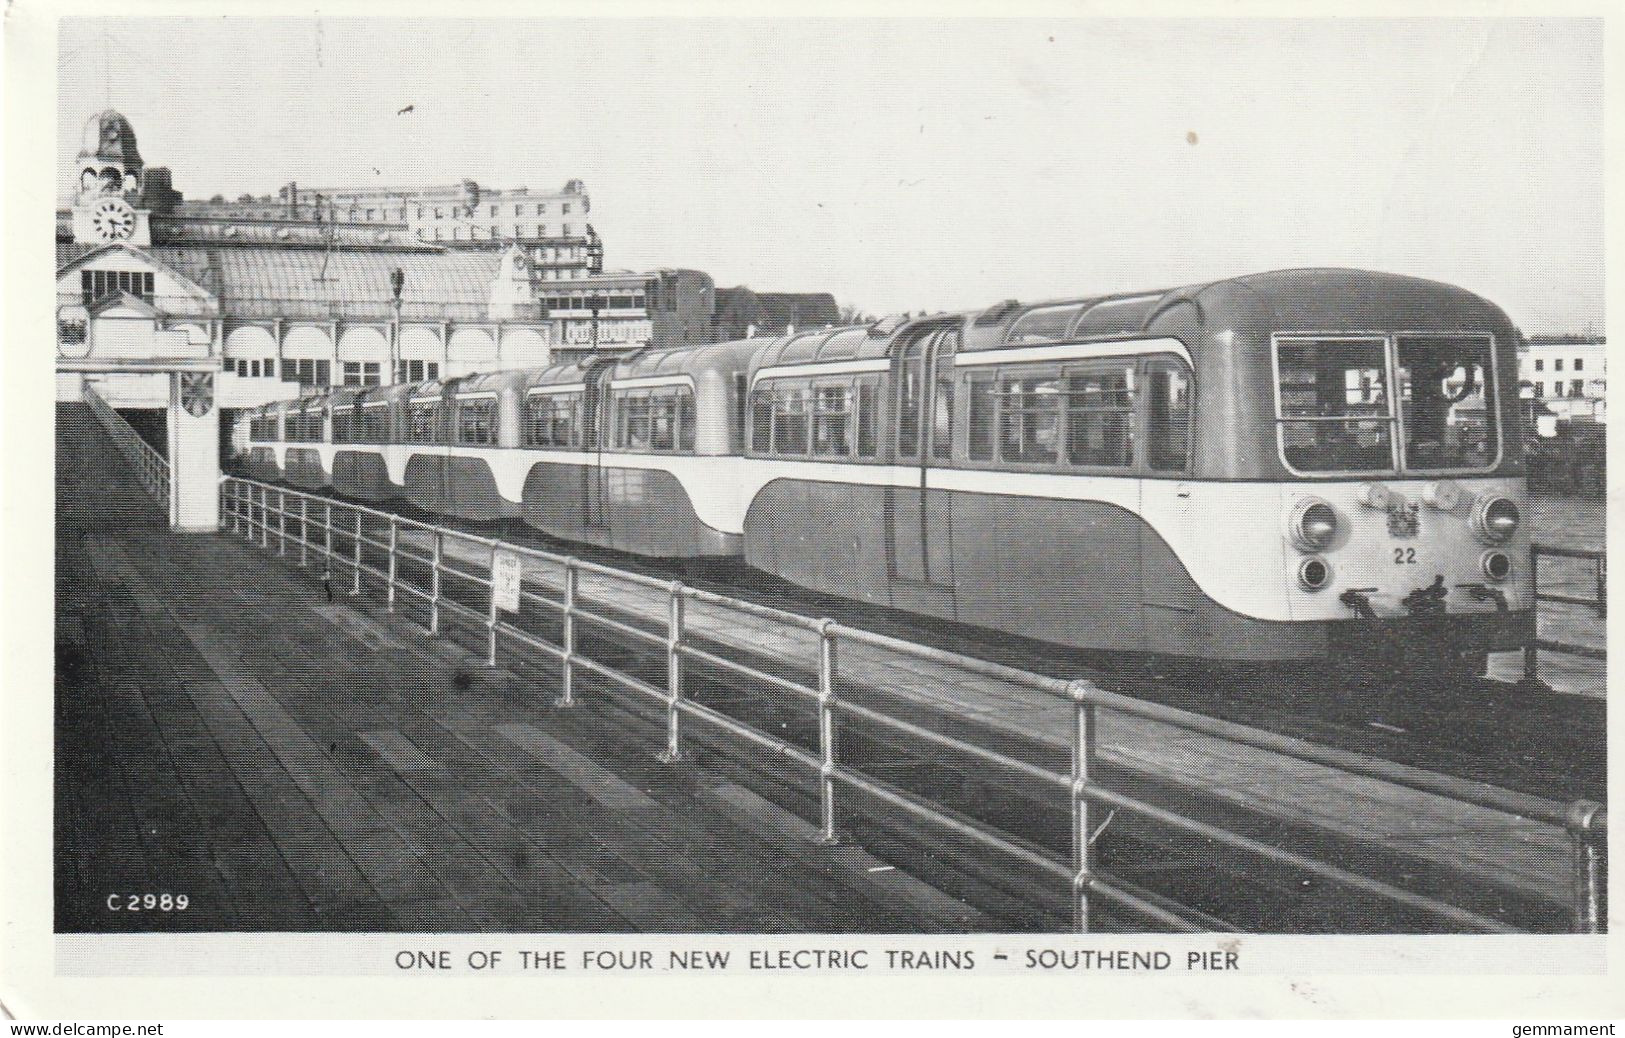 SOUTHEND PIER - ONE OF THE FOUR NEW ELECTRIC TRAINS - Southend, Westcliff & Leigh